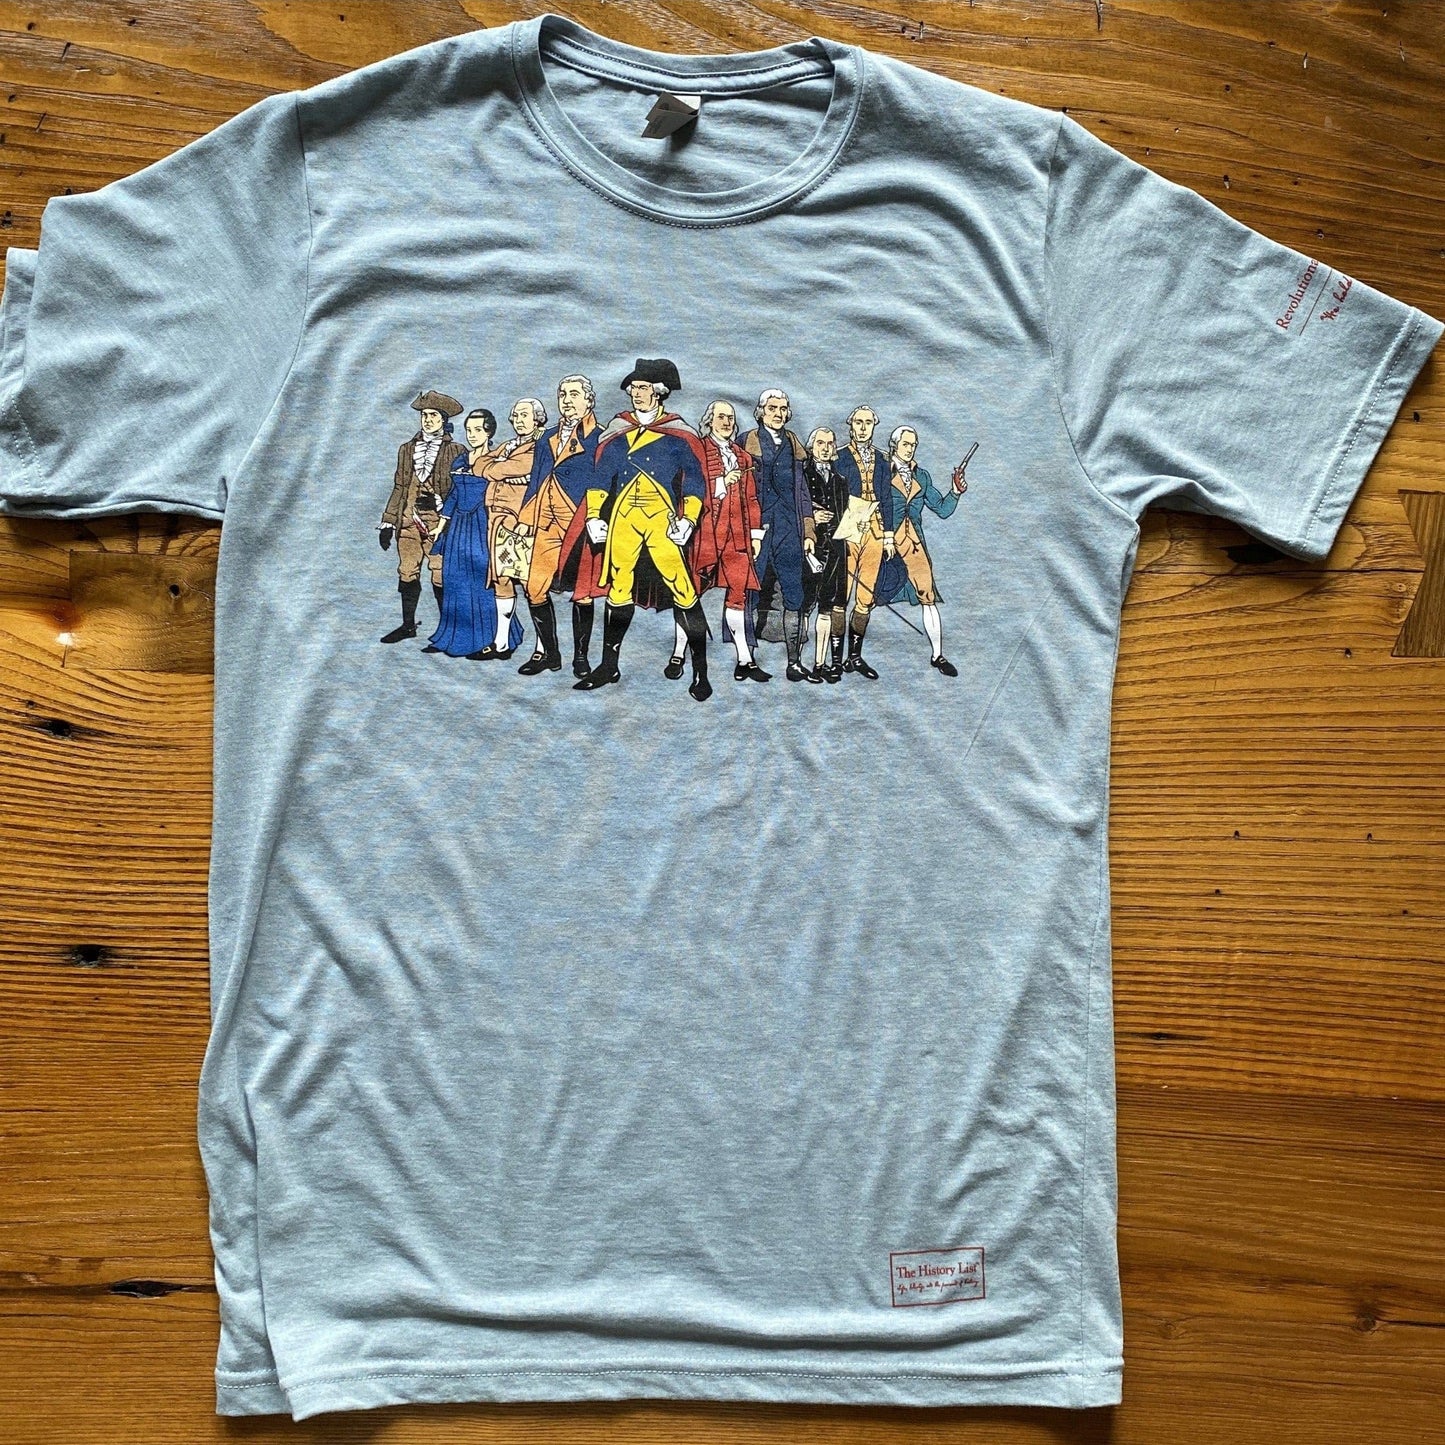 Ten "Revolutionary Superheroes" T-Shirt in Light blue heather from The History List store